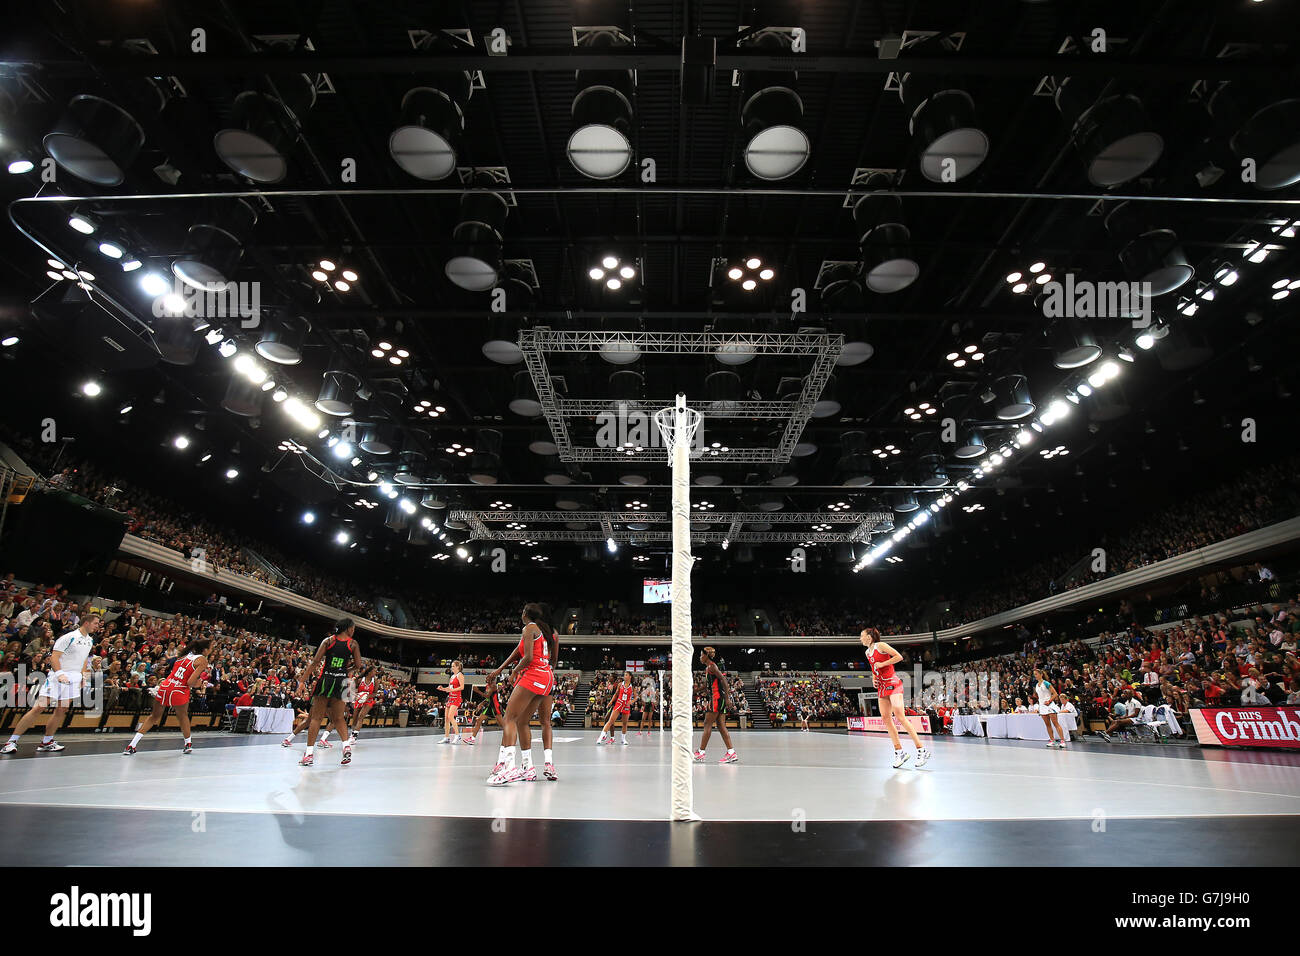 Netball - International Netball Series - England v Malawi - Copper Box Arena. A general view of the Copper Box Arena during the action between England and Malawi Stock Photo